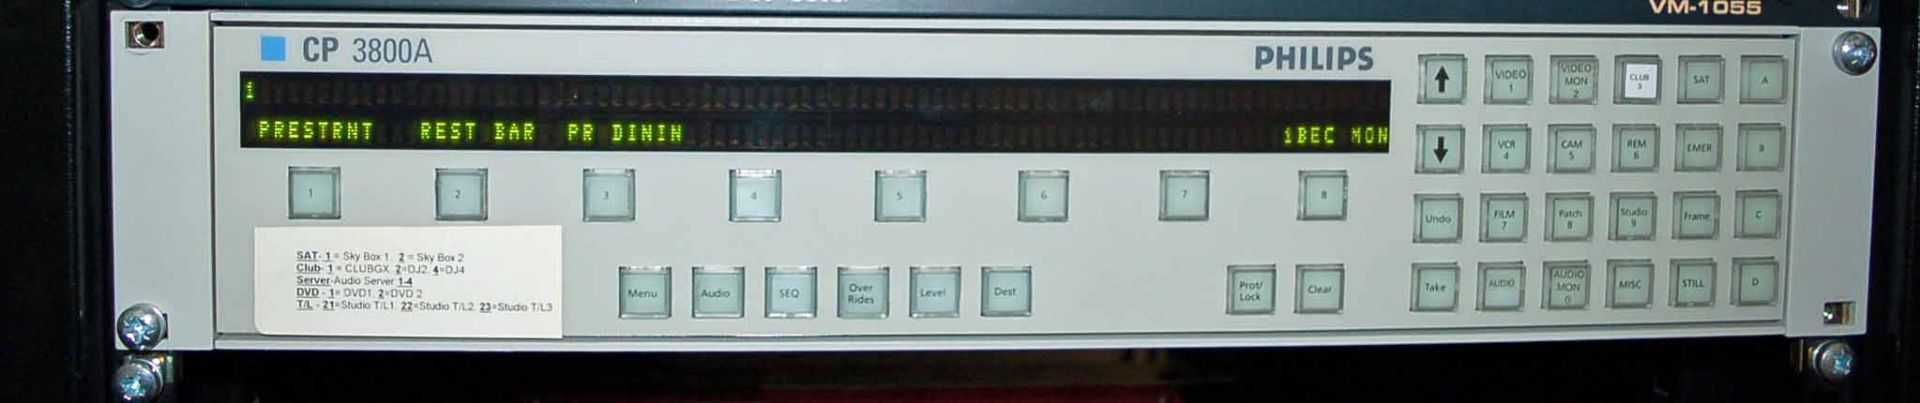 A PHILIPS CP3800A 8-Channel AV Controller